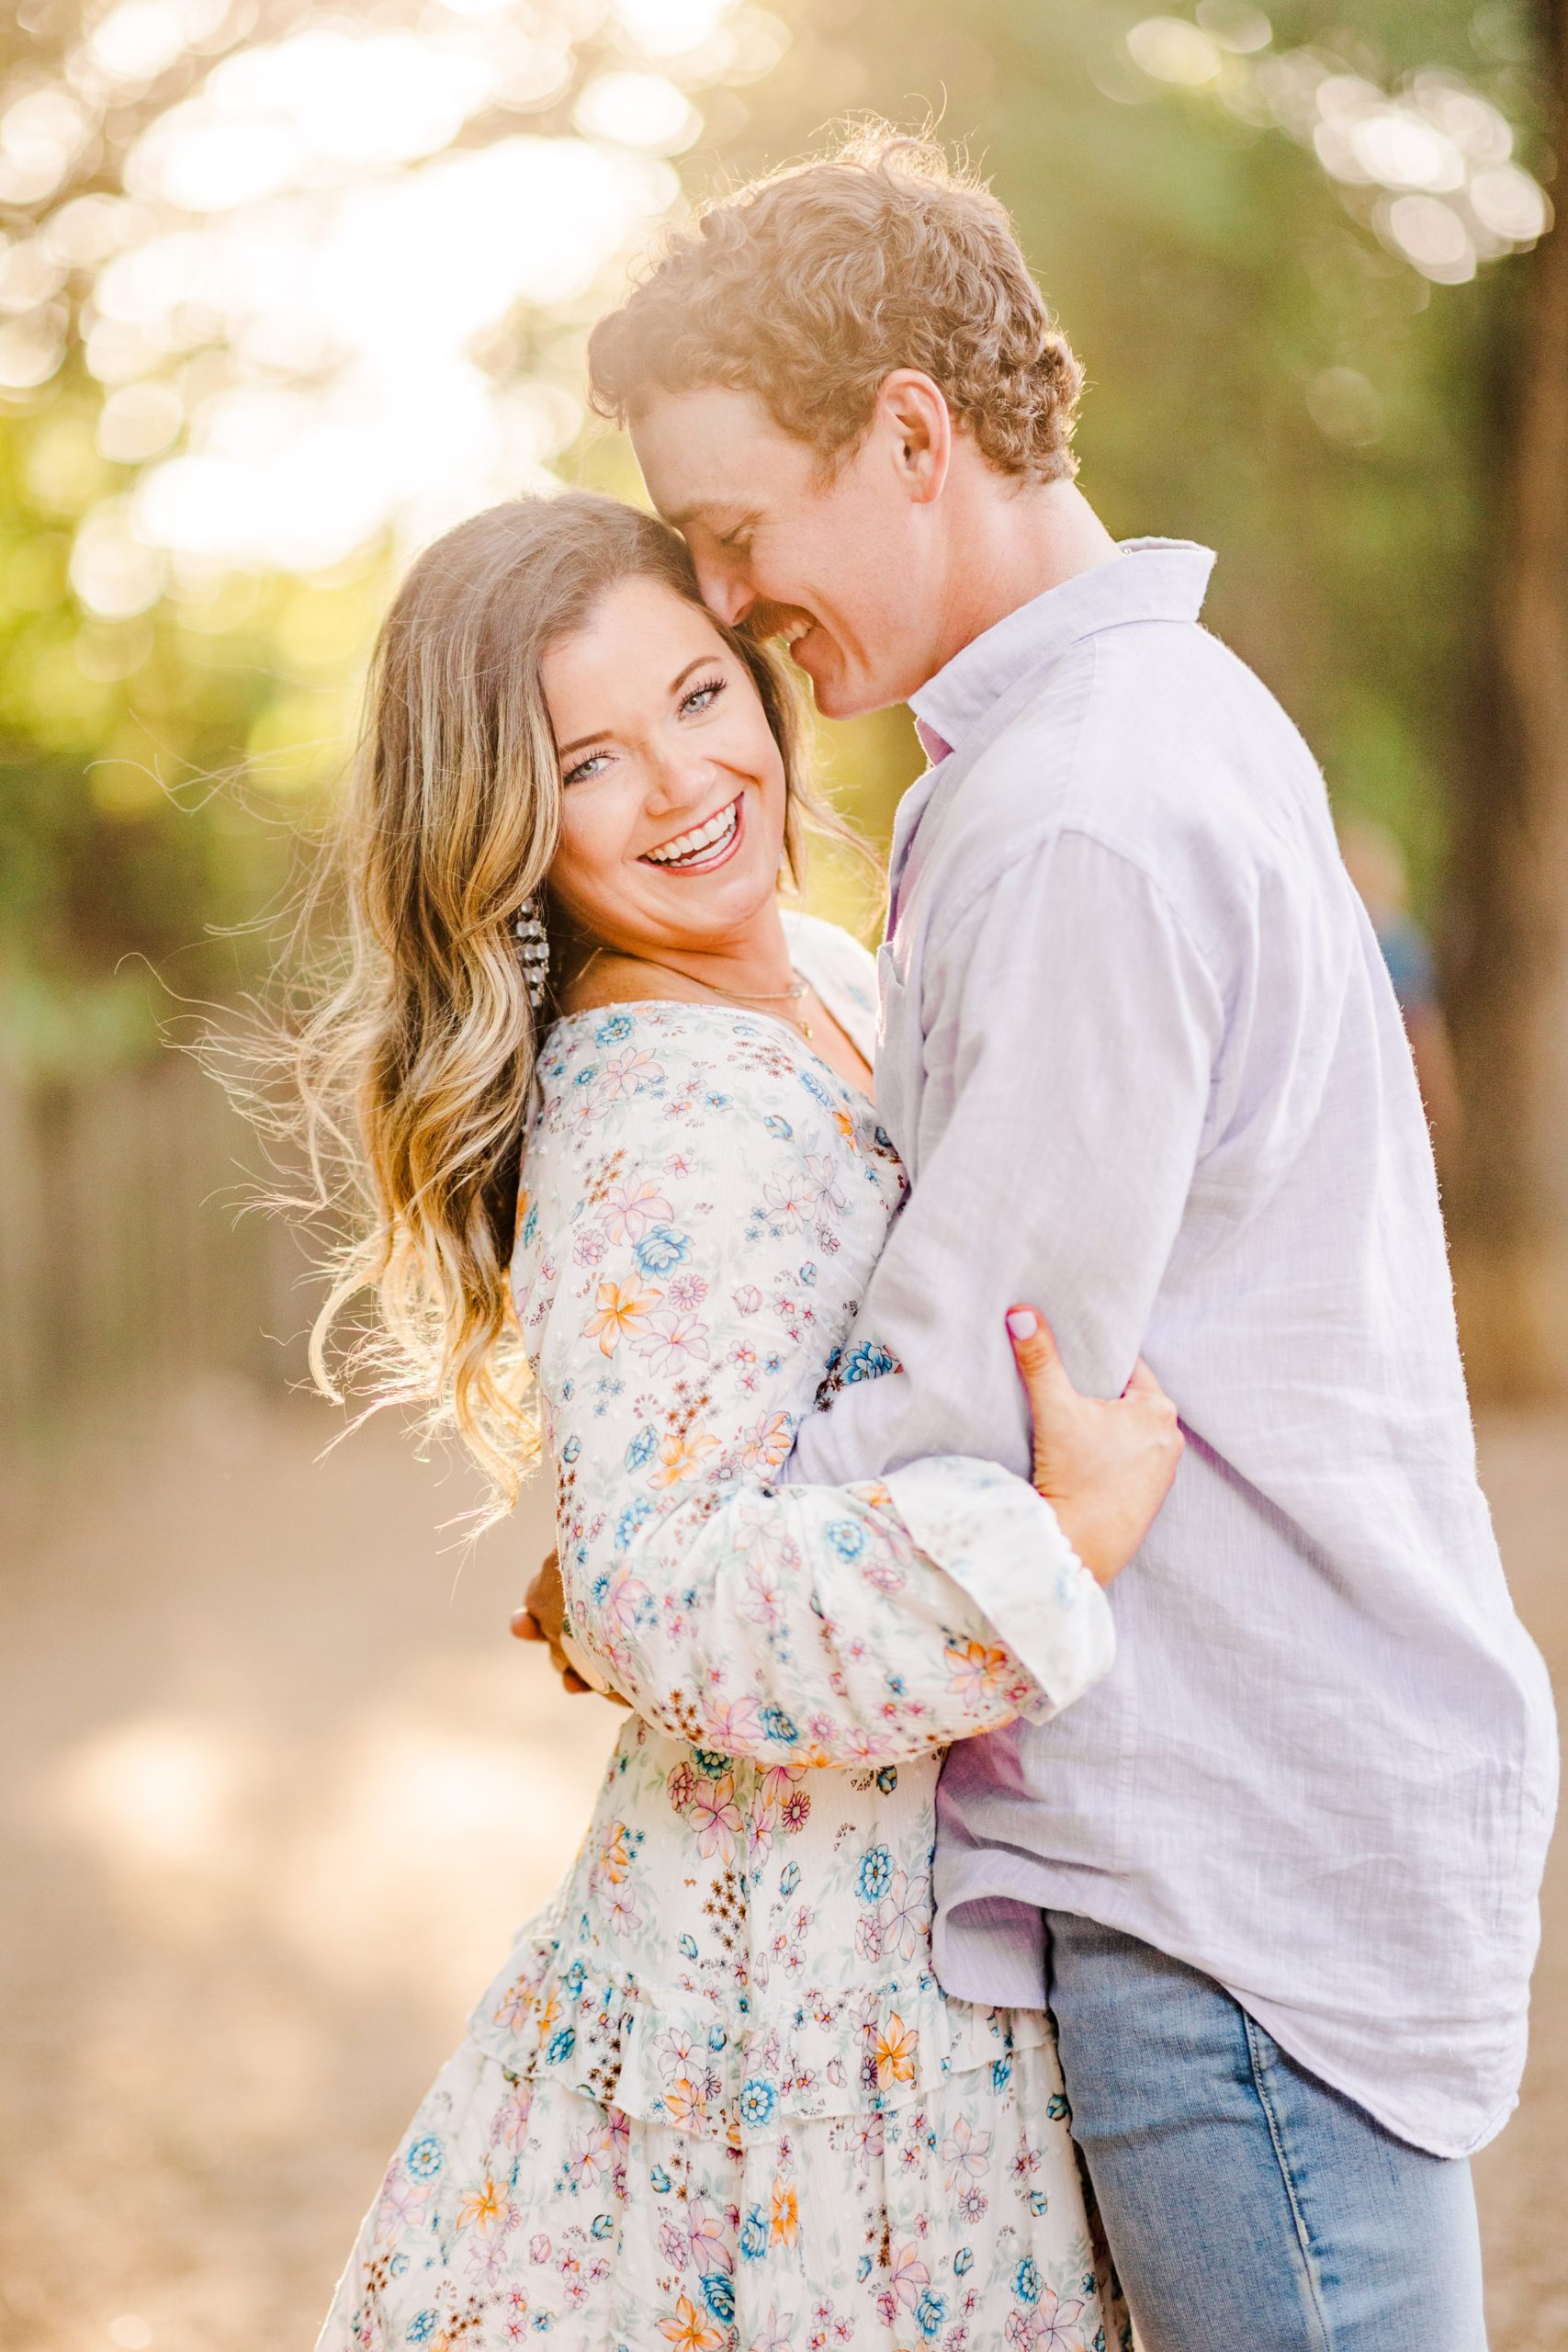 Couple embrace during their engagement session at Butler Park in Austin, Texas.